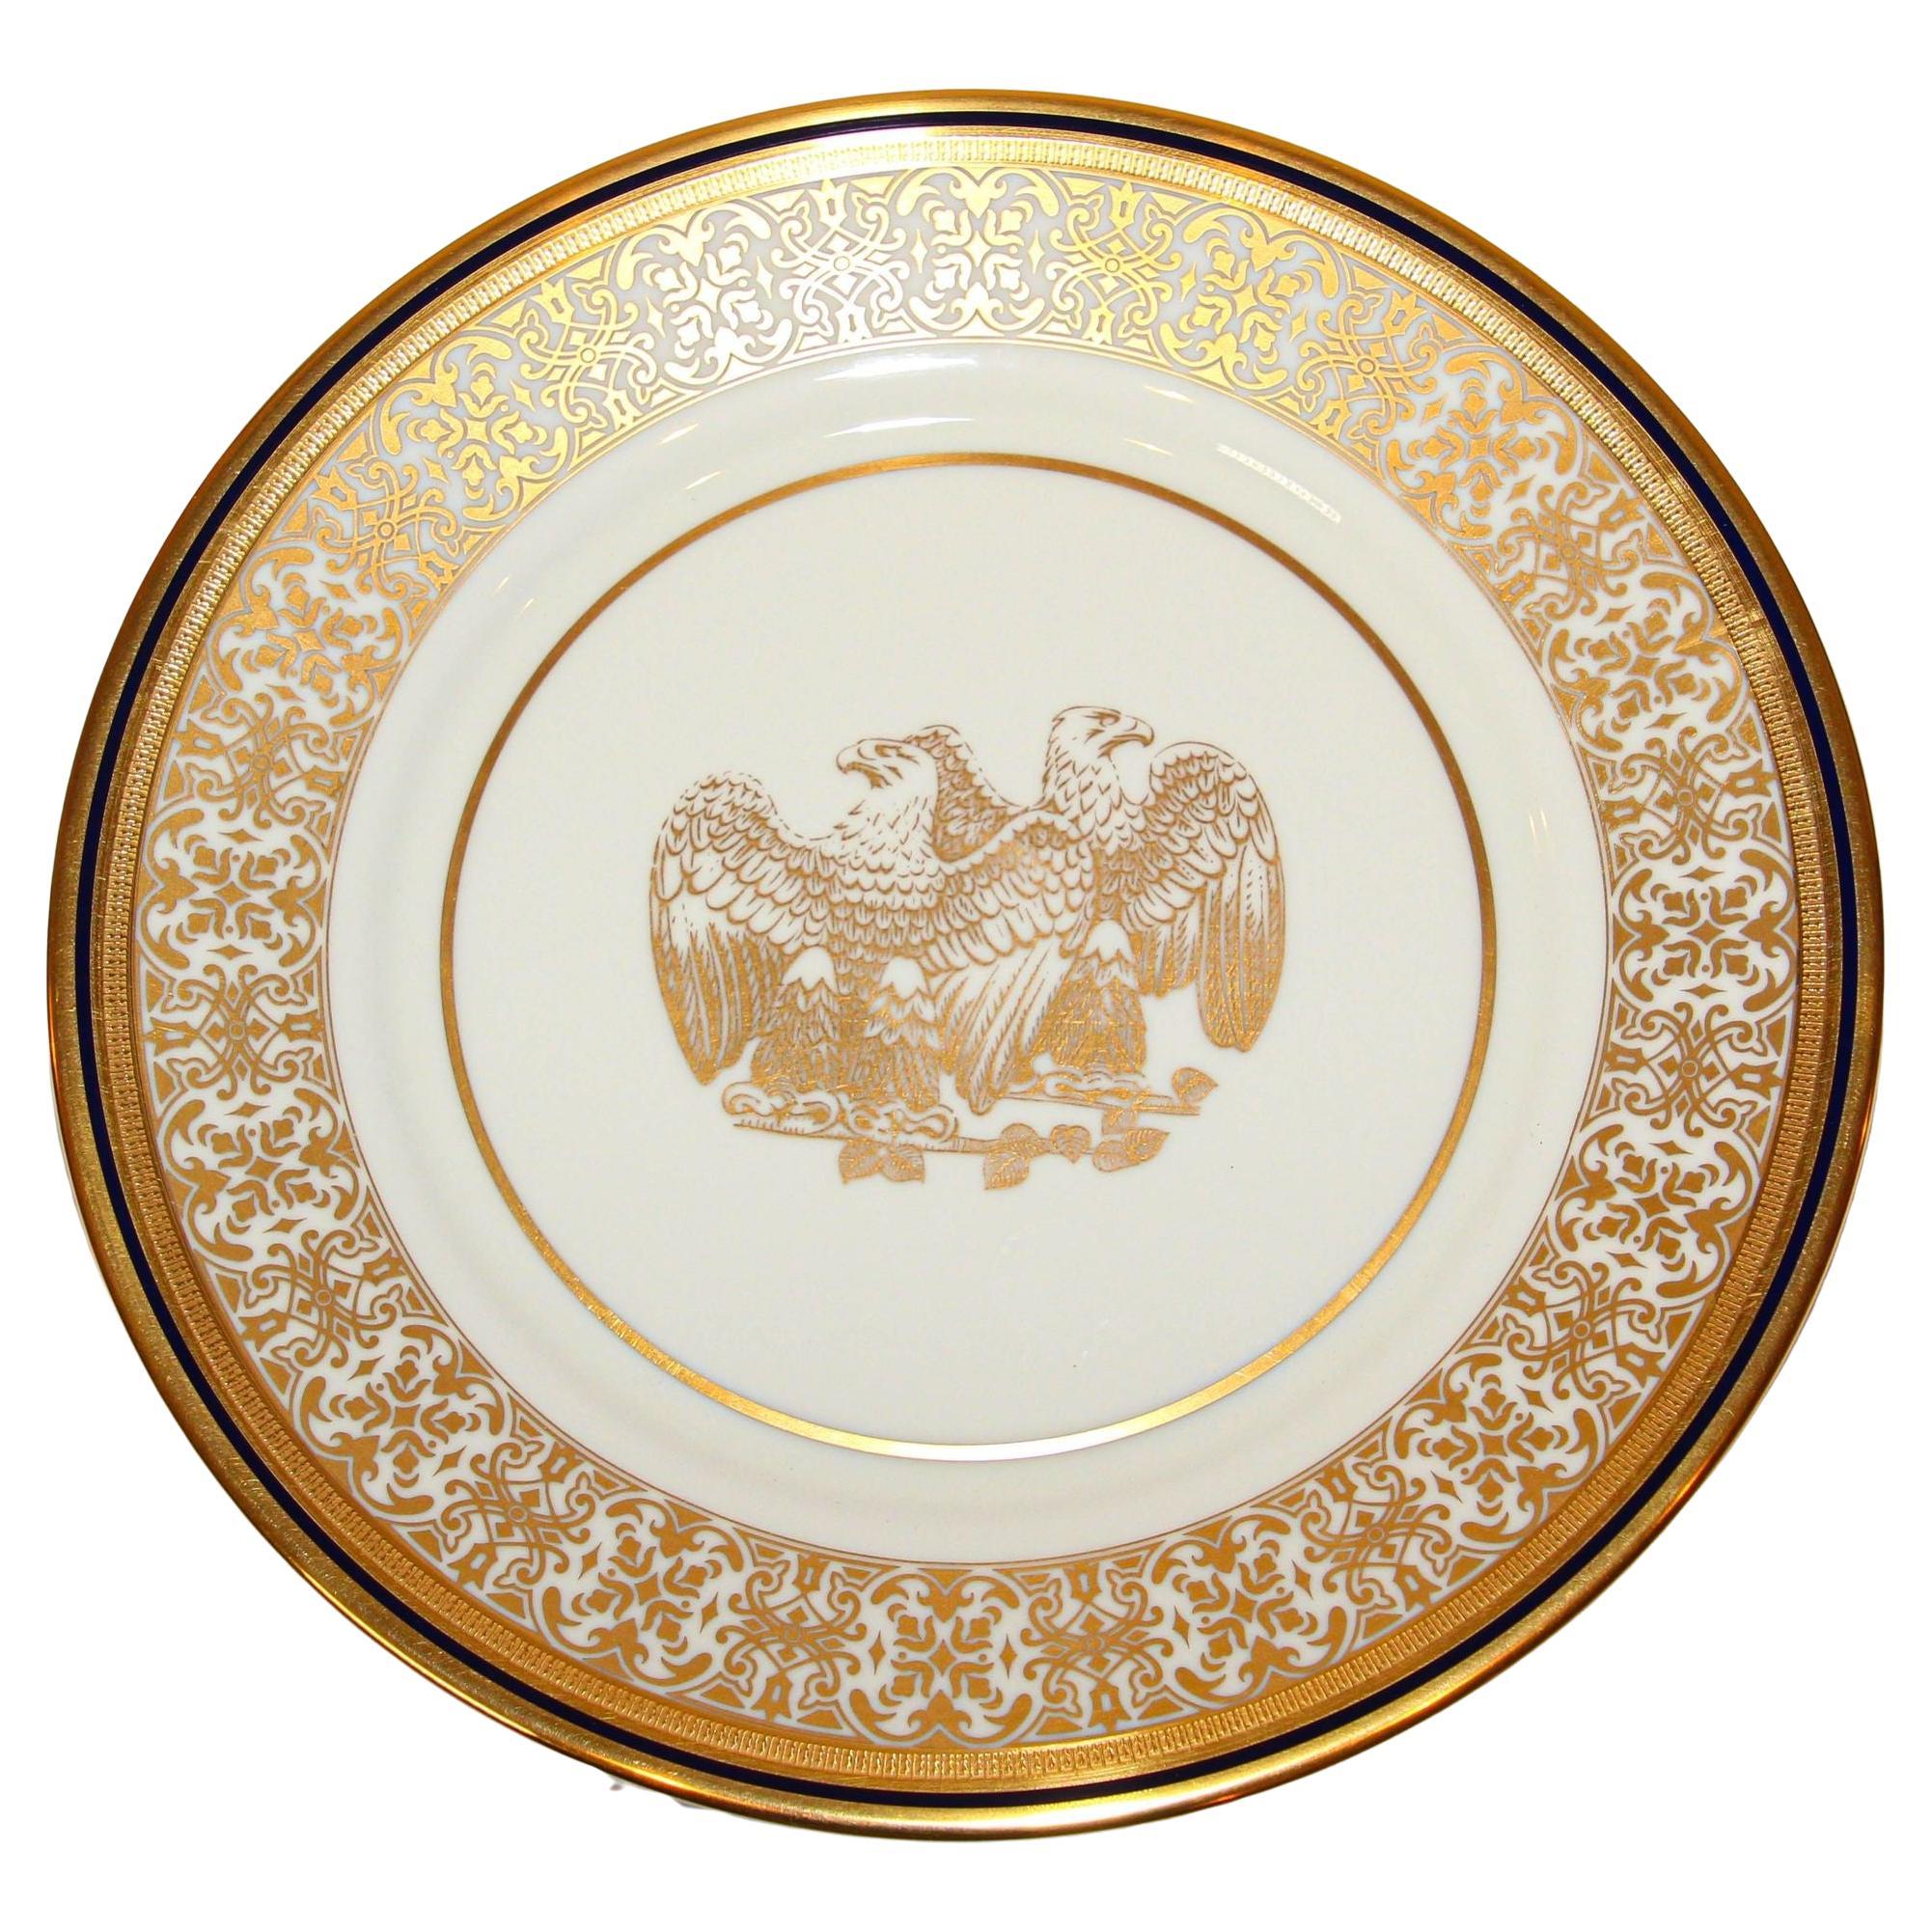 Collectible Double Eagle Bicentennial Porcelain Plate 1973 Limited Edition